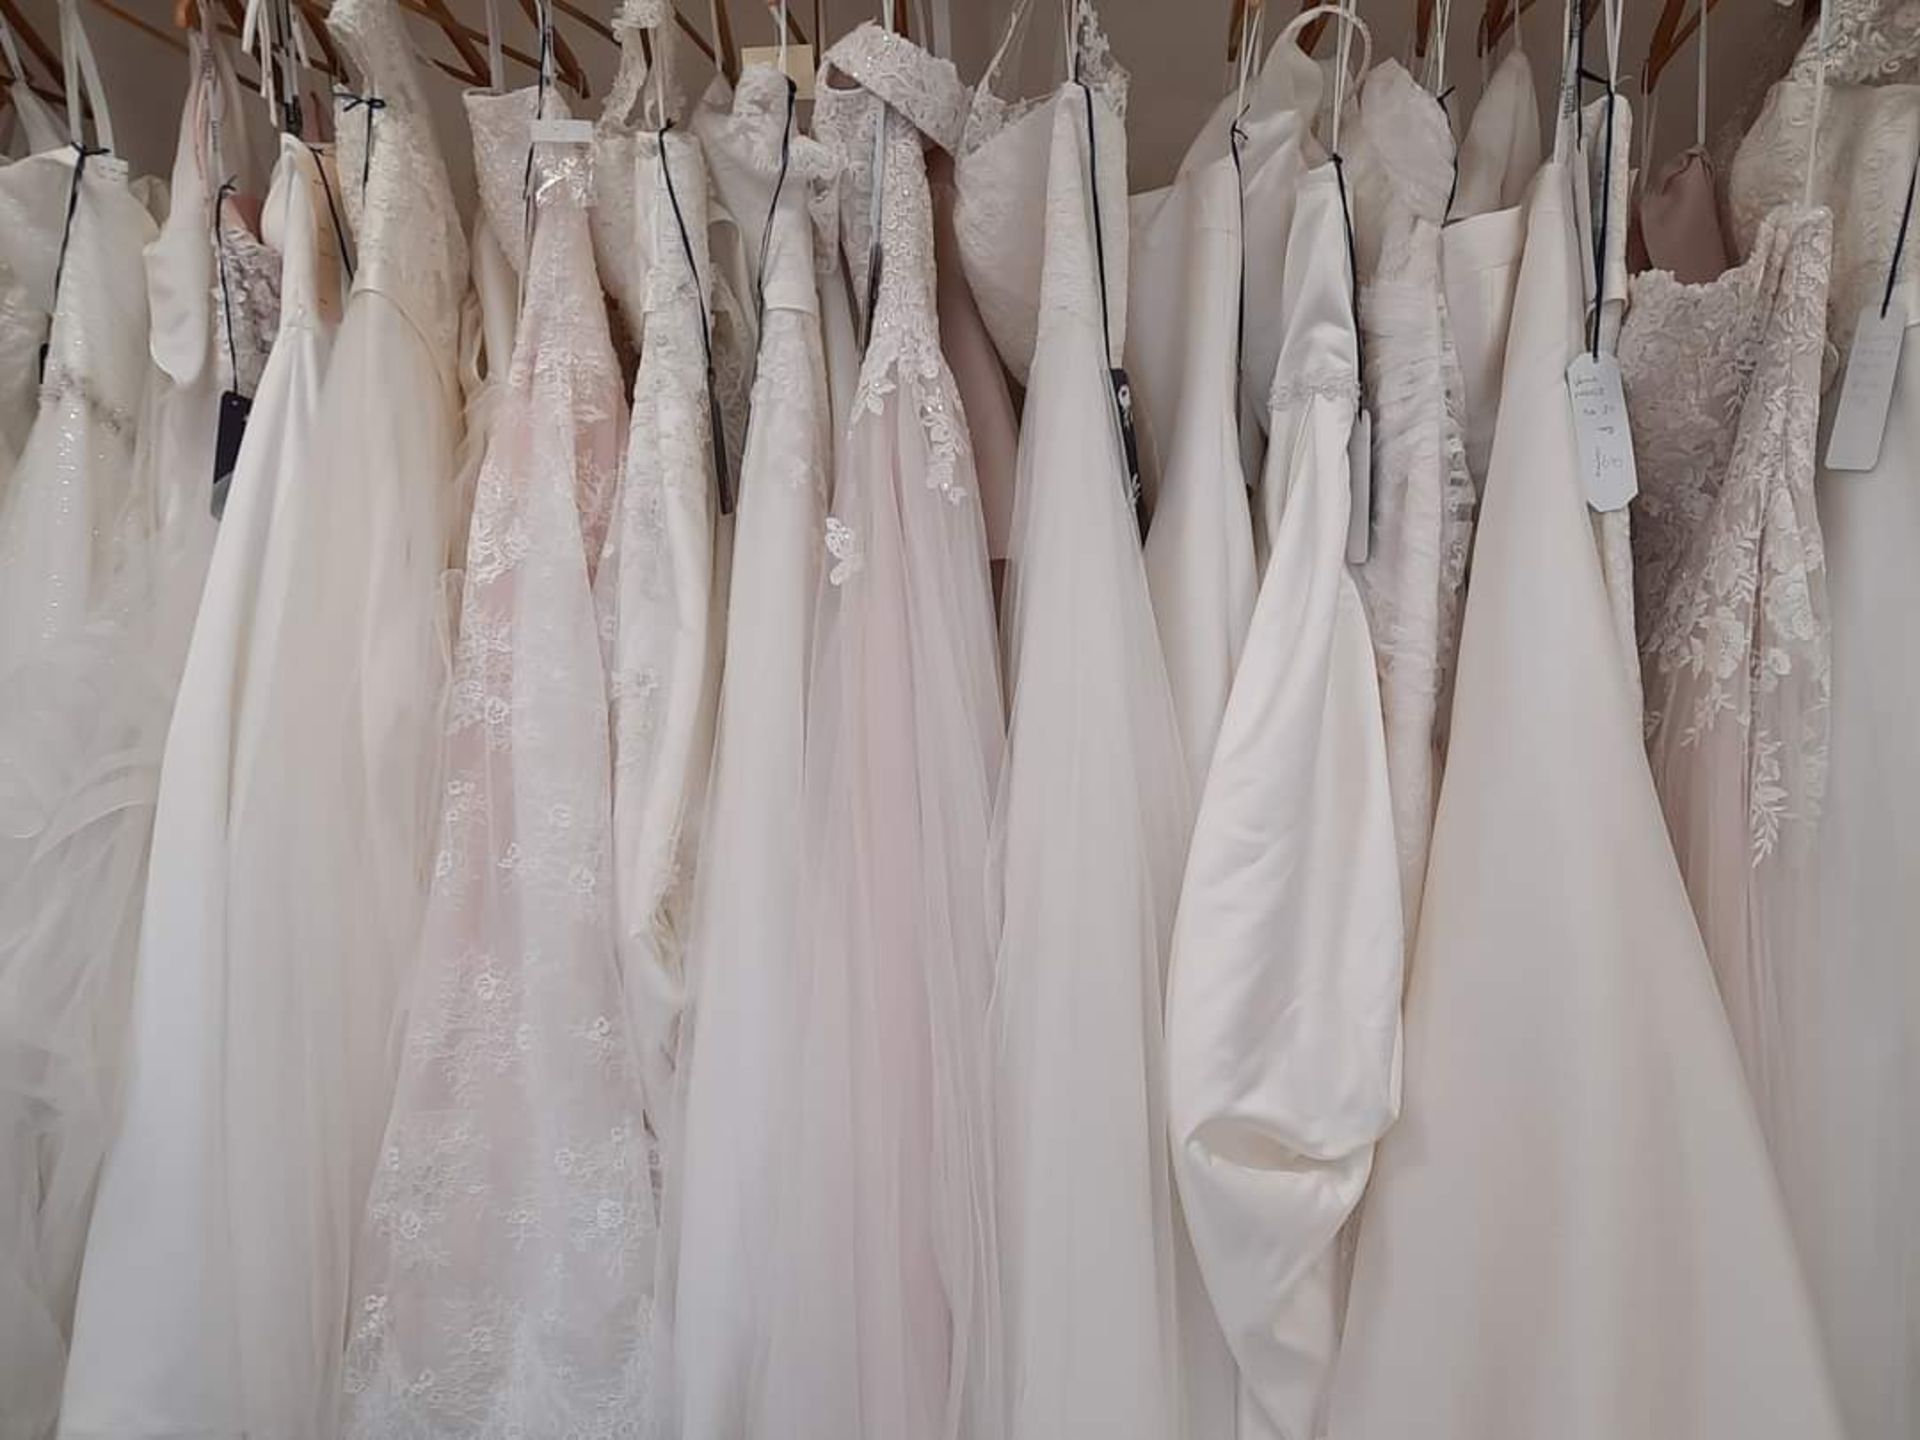 Bulk Lot of 25 Wedding Gowns/Bodices/Skirts All Mixed Sizes and Designs. RRP £25K Etx. Mainly Iv...